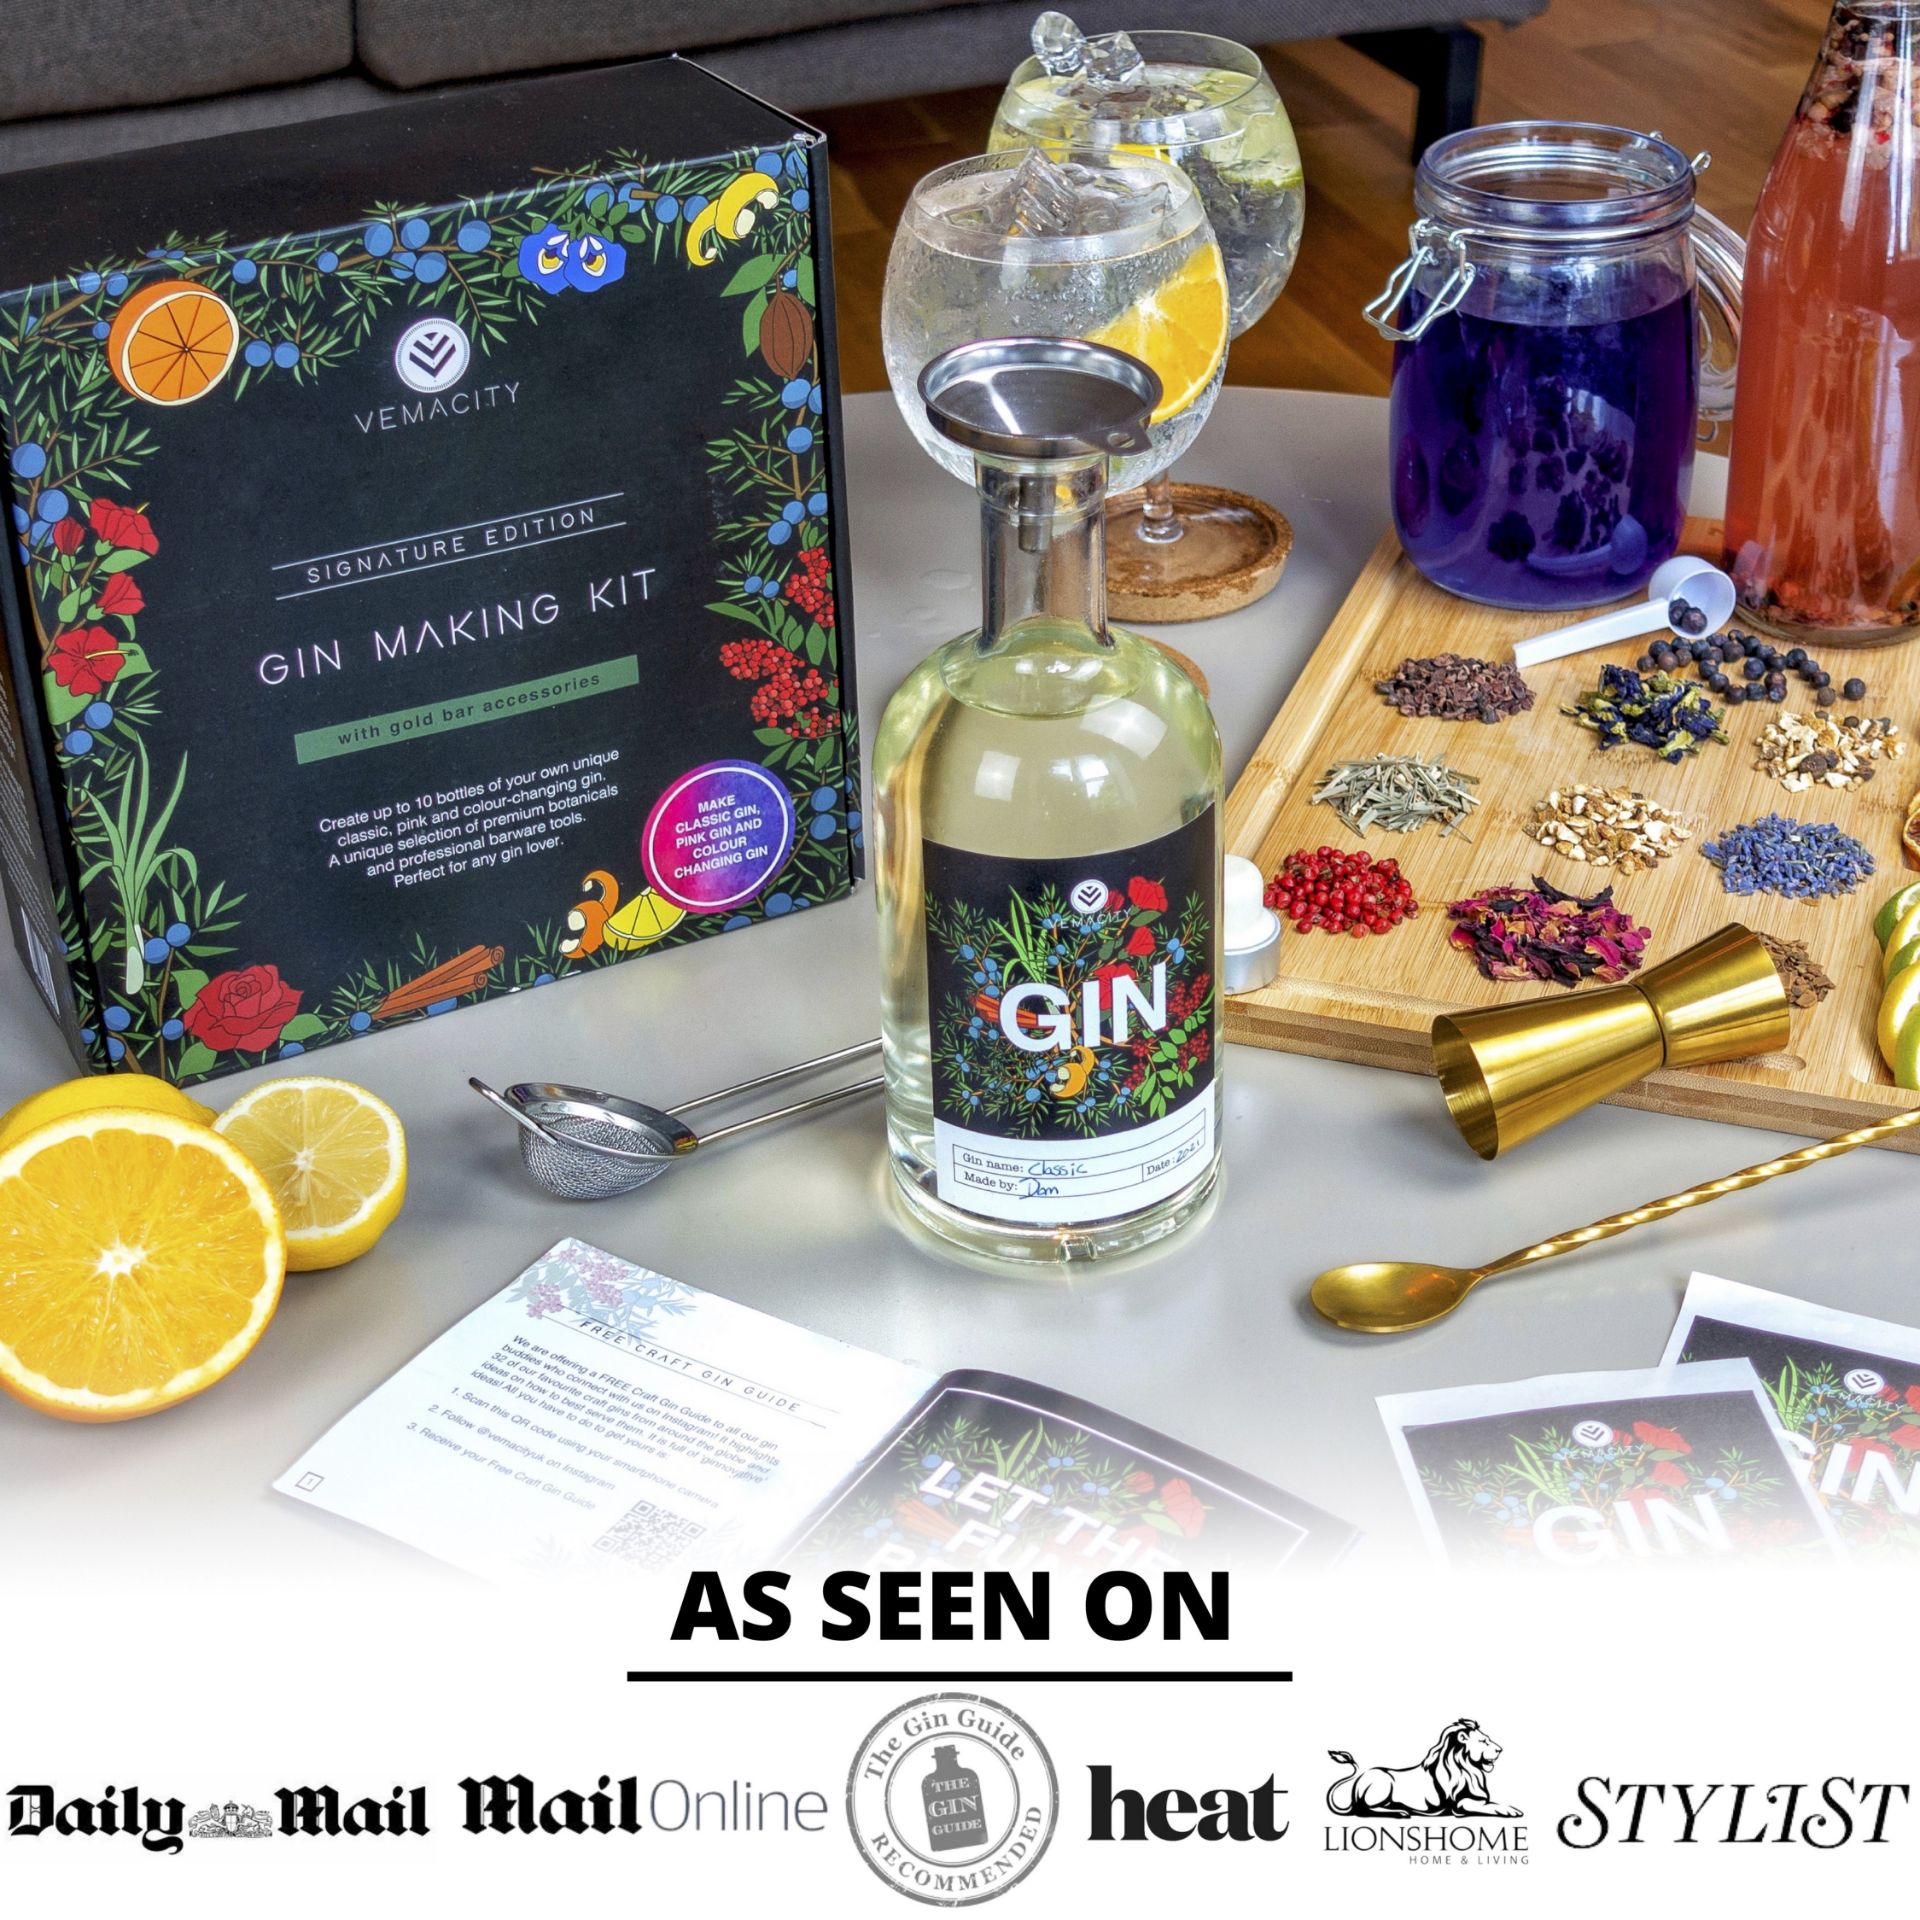 The Signature Edition Gin Making Kit - Make 10 Large Bottles of Classic, Colour-Changing & Pink G... - Image 2 of 2